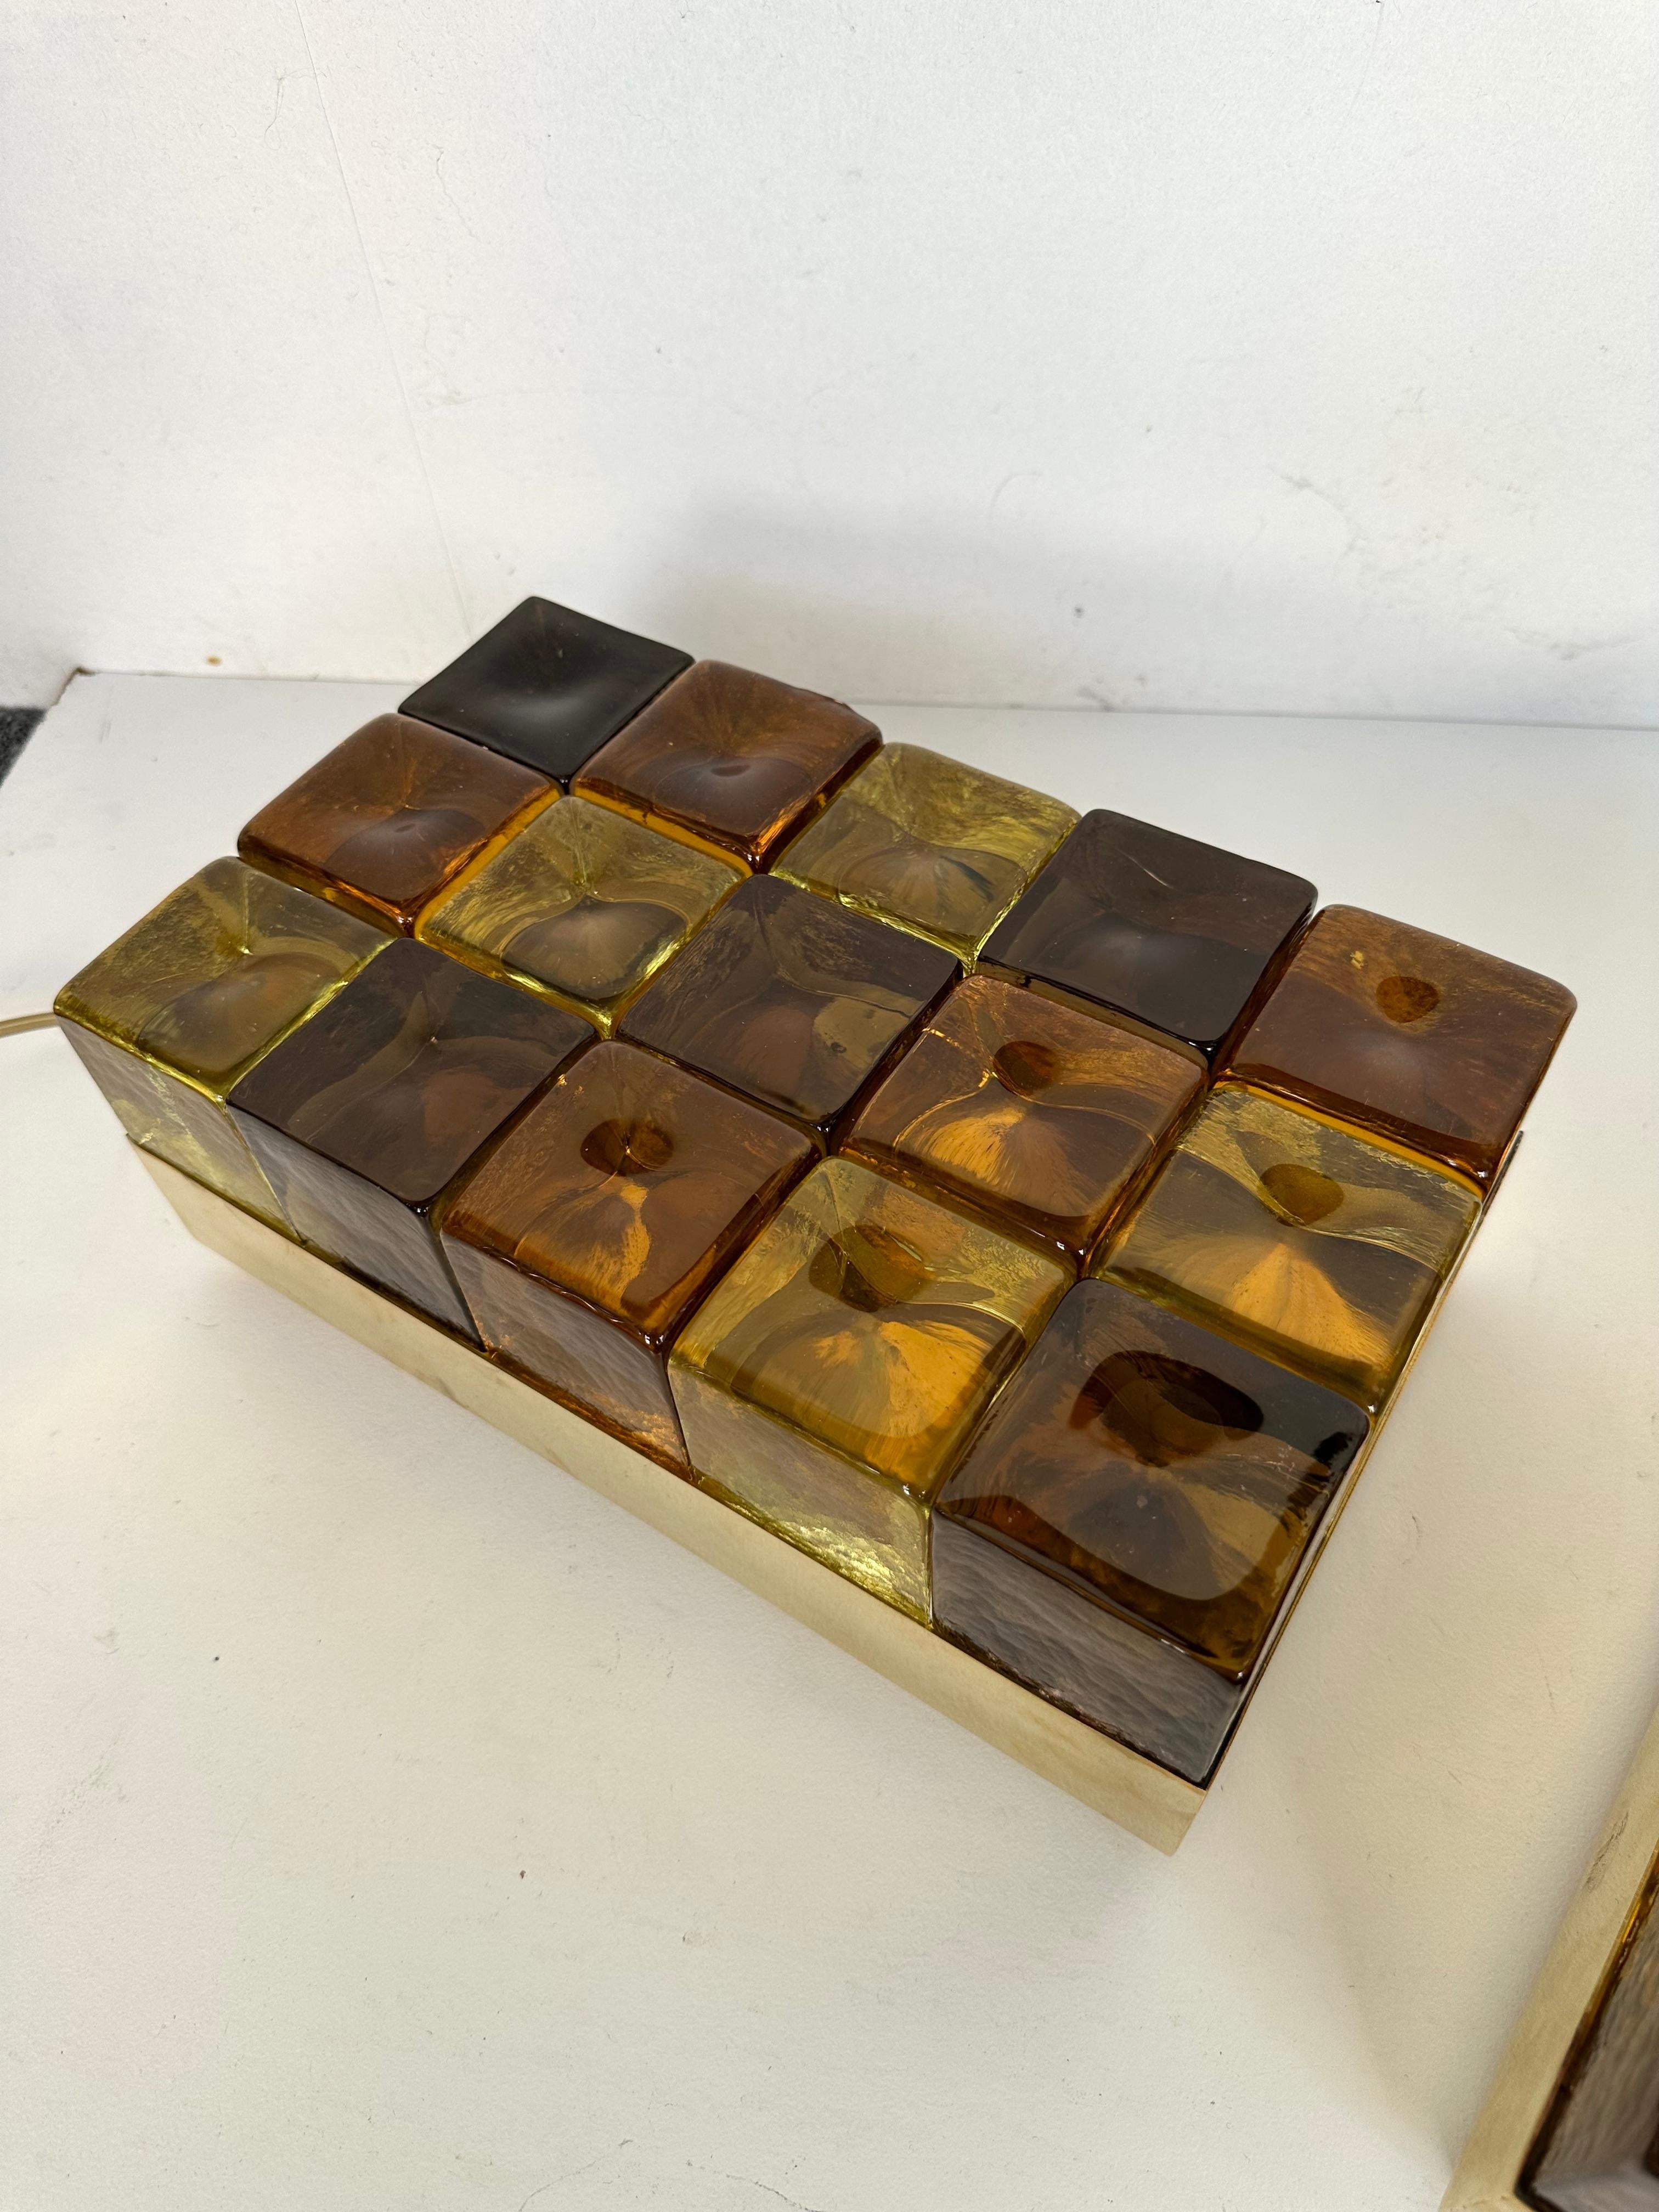 Pair of table or bedside brass box lamps with Murano glass cube marquetry. Contemporary work from a small italian artisanal design workshop in a Mid-Century Modern Space Age mood like Vistosi, Poliarte, Mazzega, Carlo Aldo Nason, Venini.